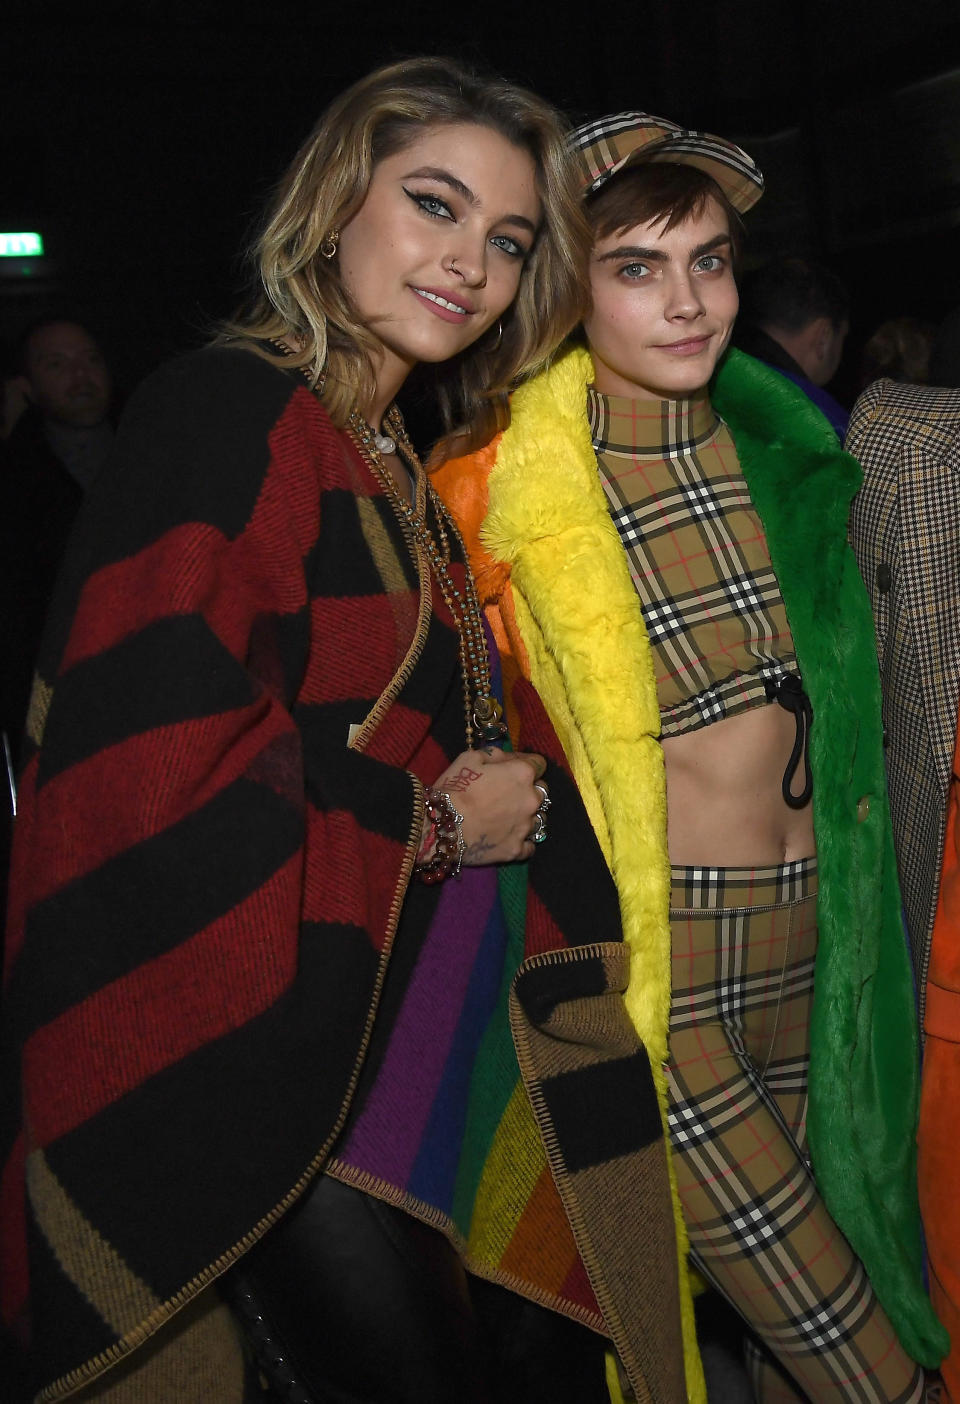 Paris Jackson and Cara Delevingne at the Burberry February 2018 show during London Fashion Week. (Photo: Gareth Cattermole/Getty Images for Burberry)